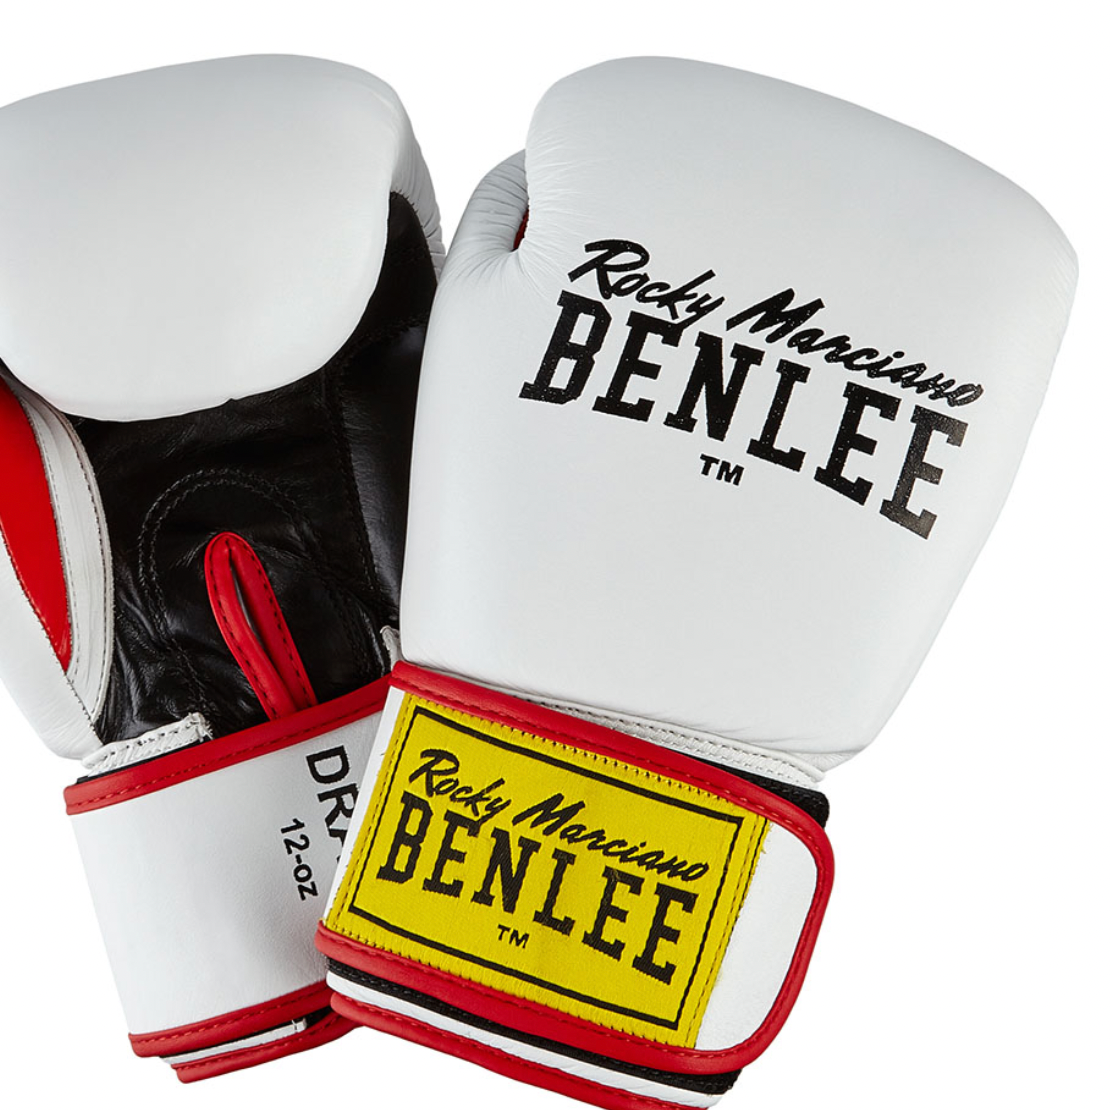 Benlee boxing gloves "Draco"